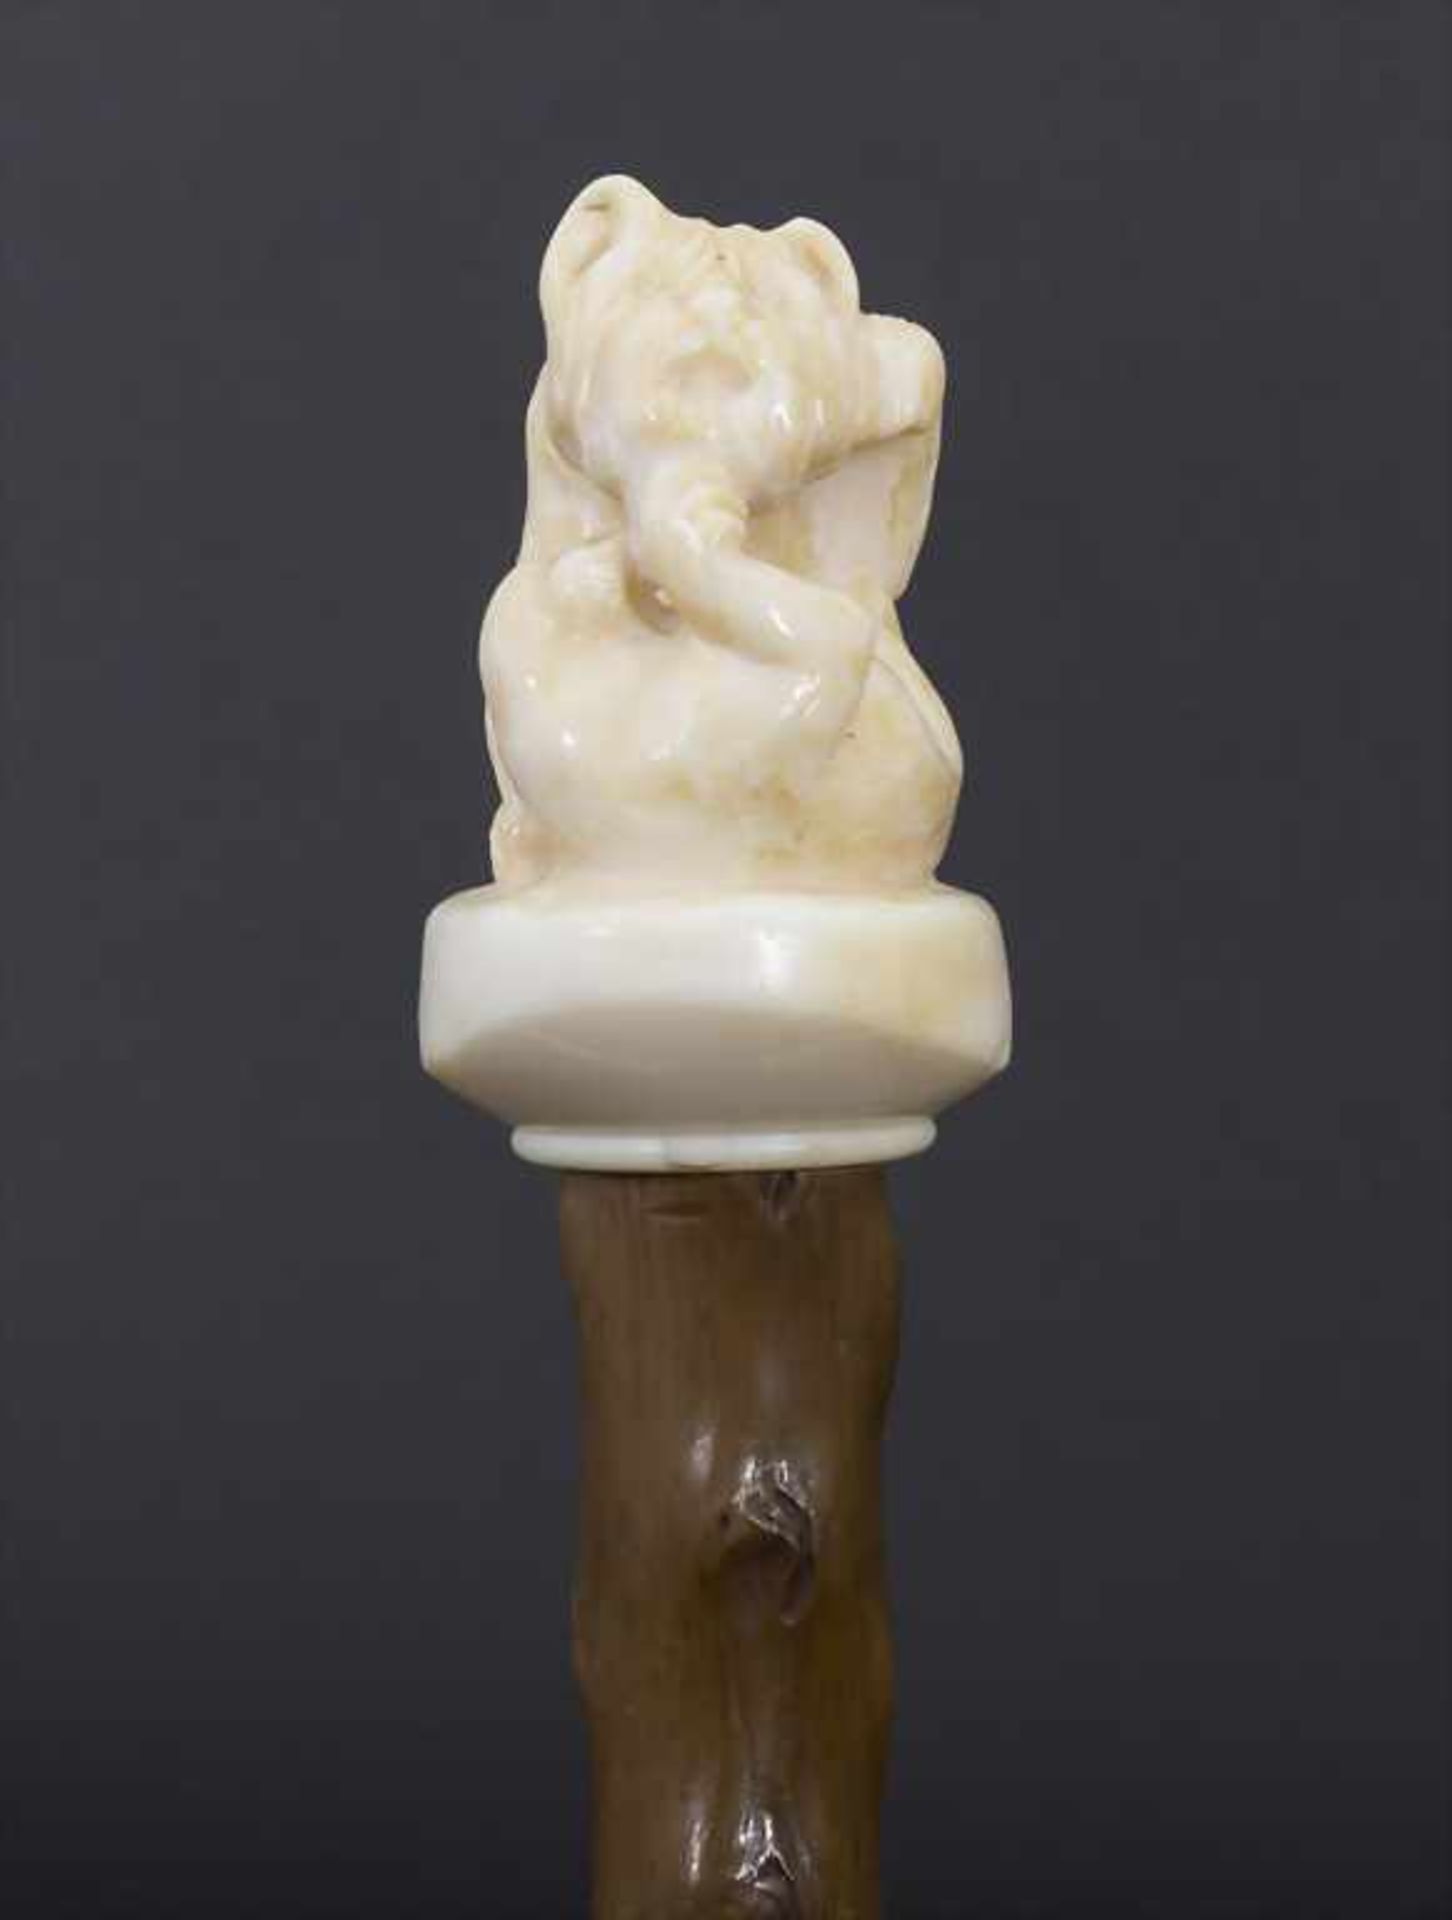 Gehstock mit Elfenbeingriff 'Spielende Hunde' / A cane with ivory handle 'playing dogs', um